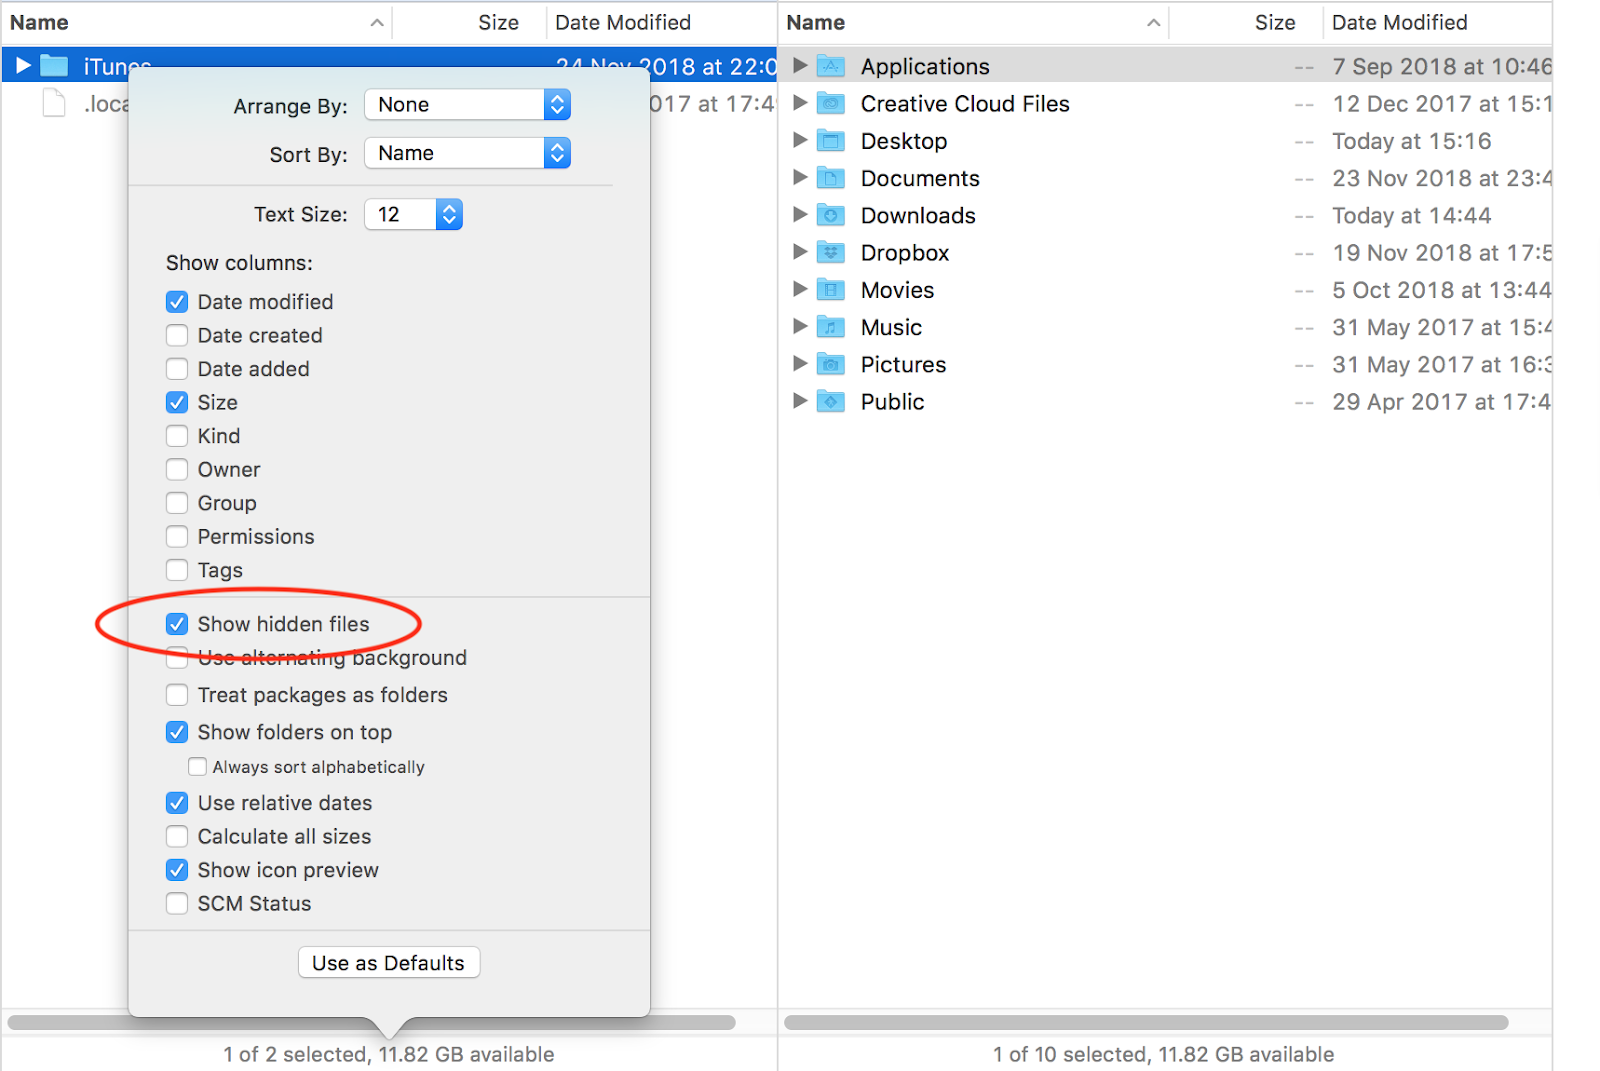 Check Finder preferences to show hidden files